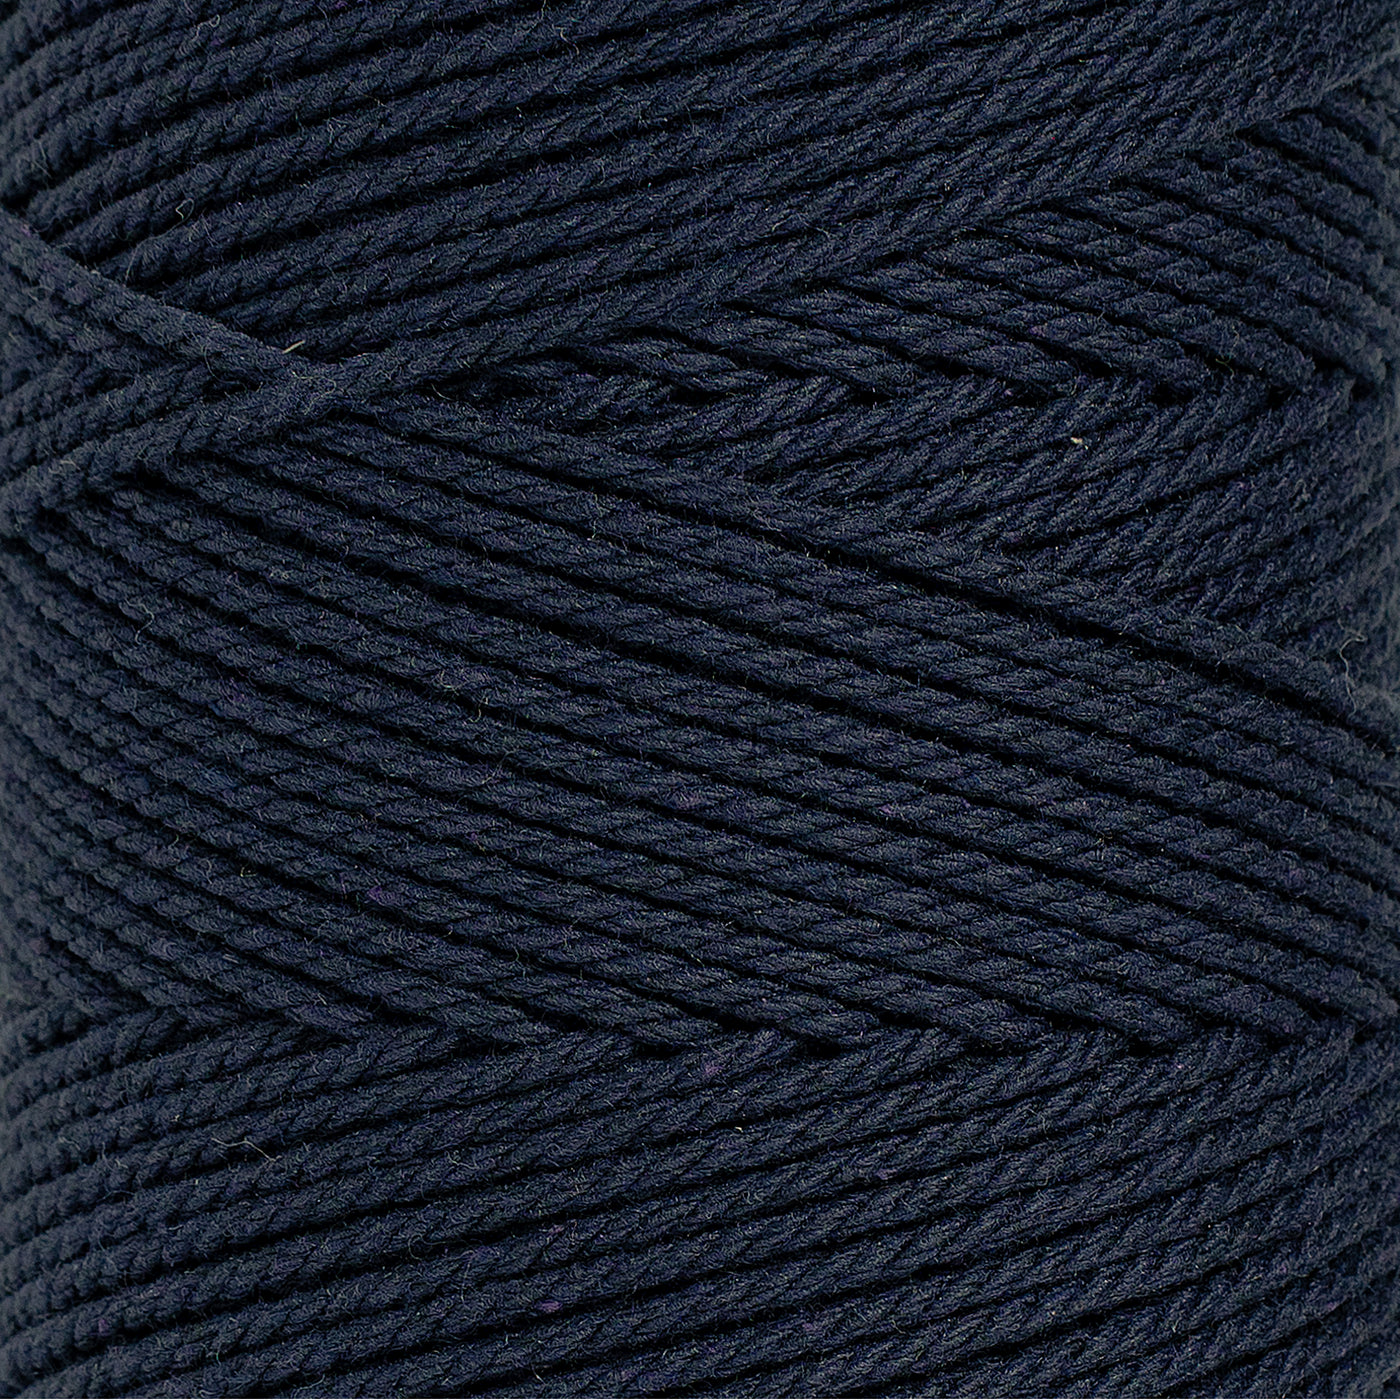 COTTON ROPE ZERO WASTE 2 MM - 3 PLY - NAVY BLUE COLOR